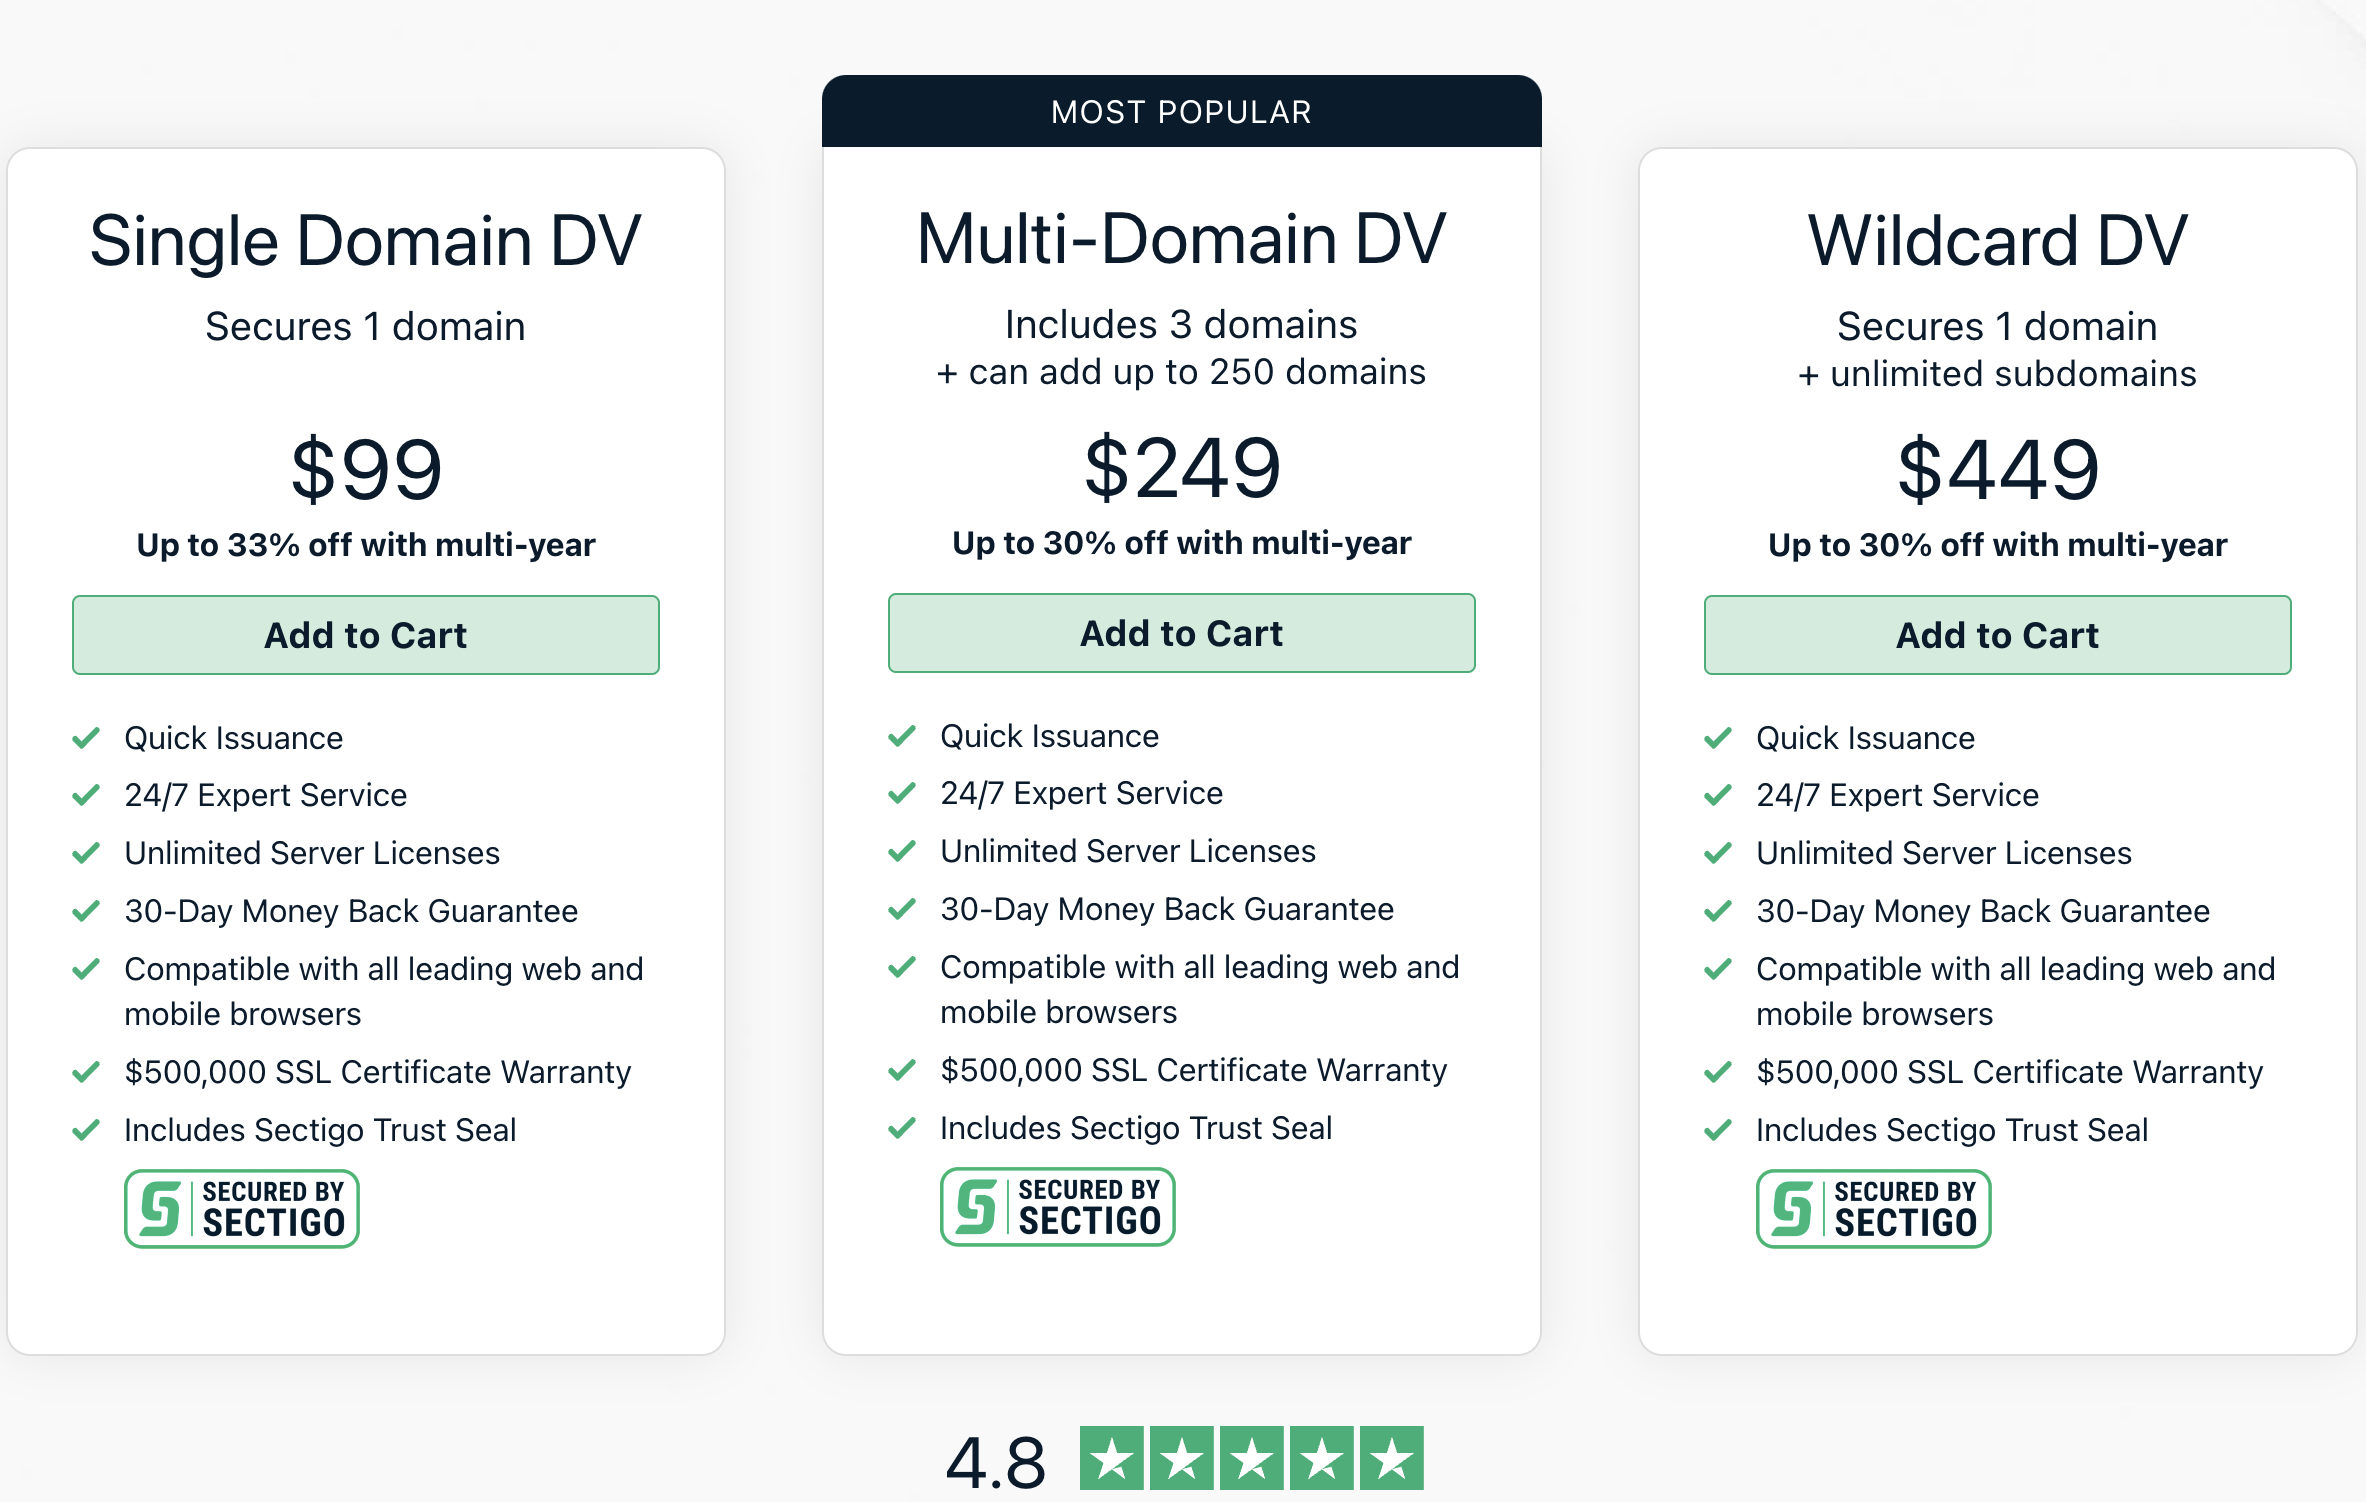 $99 / Year for One Domain, $249 / Year for 3 Domains, $449 / Year for
Unlimited Domains